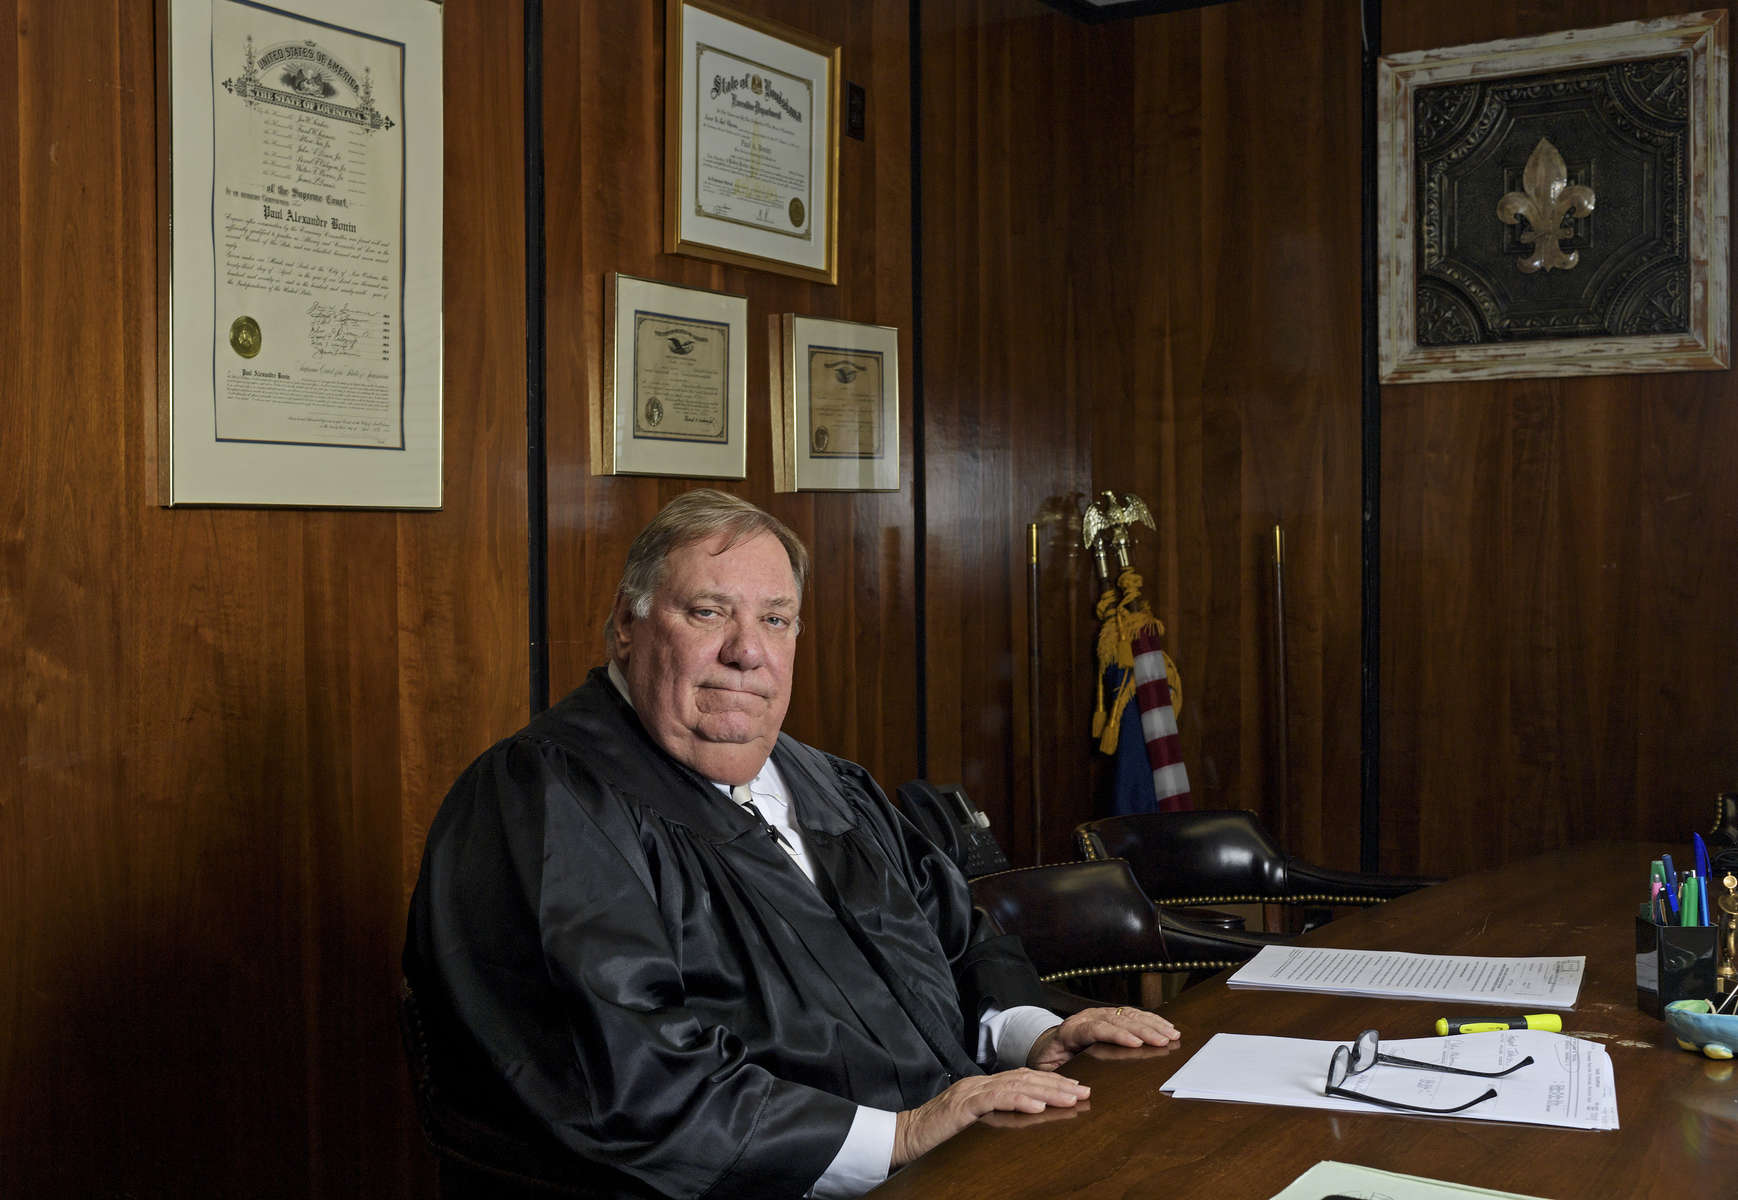 Portraits included in non-unanimous jury project that was awarded the 2019 Pulitzer Prize for Local Reporting. Orleans Parish Criminal District Judge Paul Bonin is pictured in his chambers in New Orleans, La., Friday, April 20, 2018. Judge Bonin presided over one of the first 10-2 convictions challenged to a mistrial after the U.S. Supreme Court decided to reconsider nearly a half-century of precedent allowing split-jury verdicts.